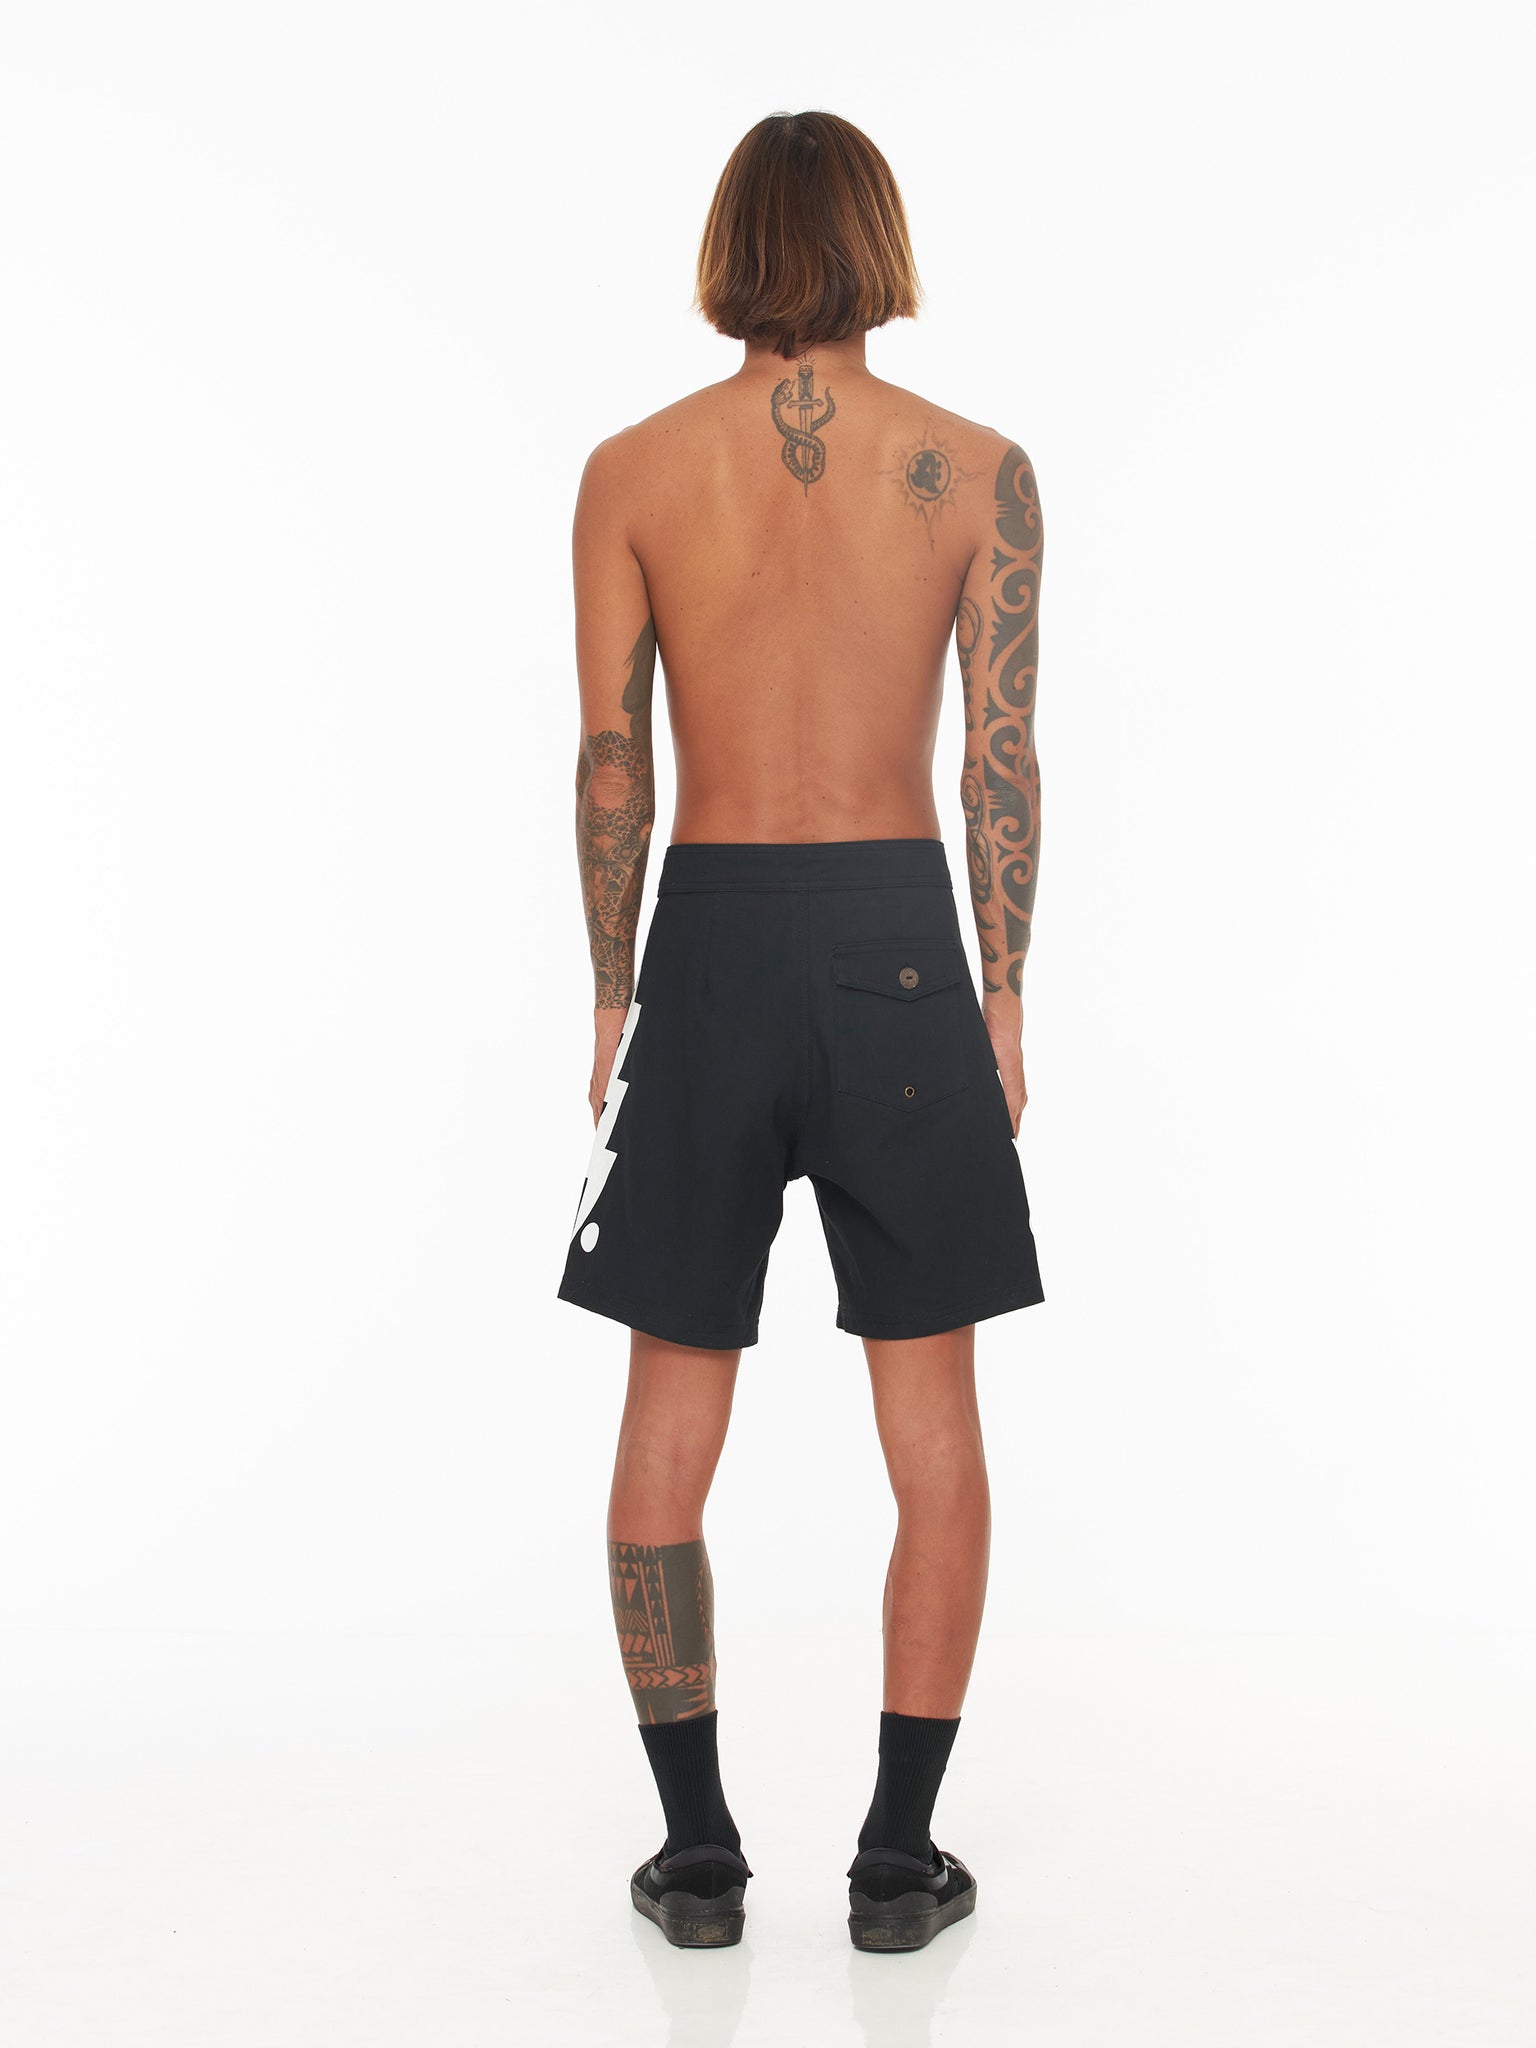 Earth Island - Surf Culture and Lifestyle - Product - Black Short